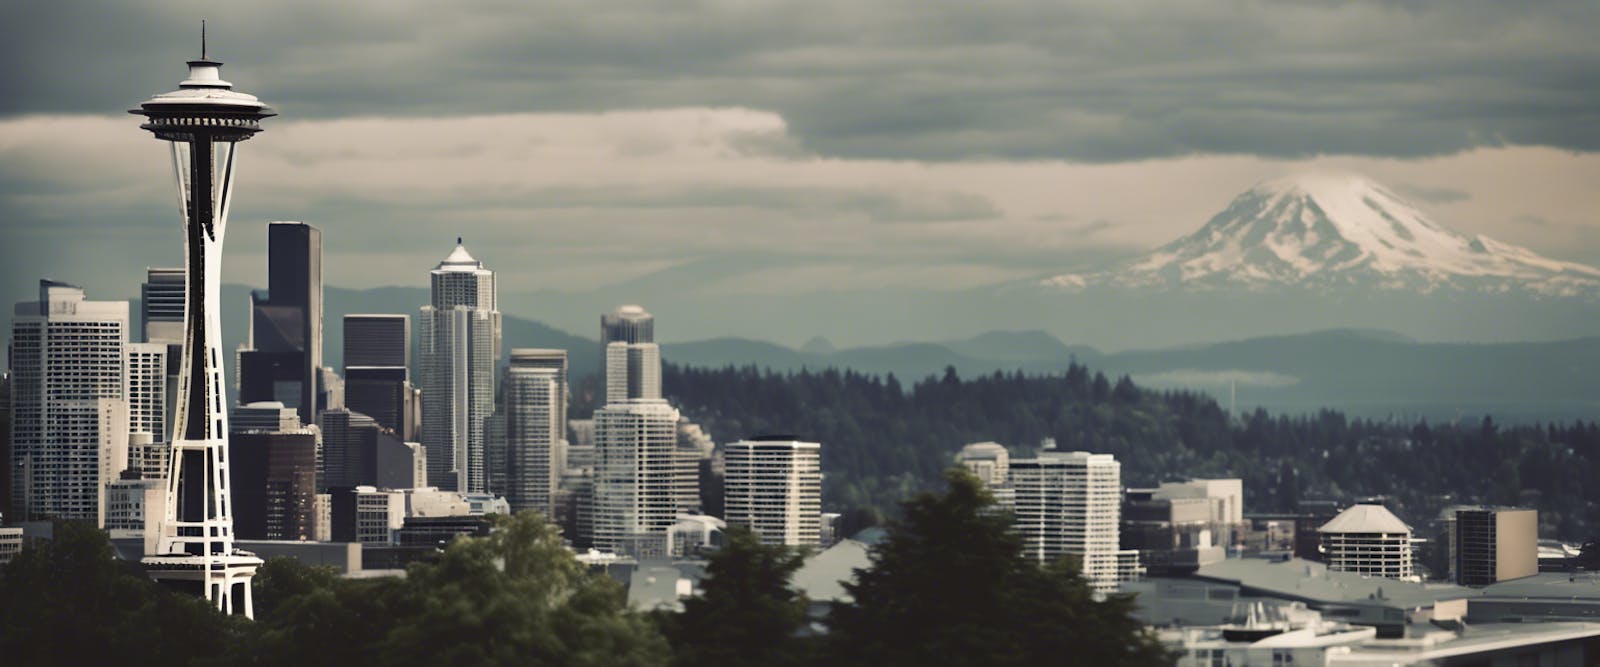 Revealing the Magic of Seattle and AWS: My Adventure as an Exam SME